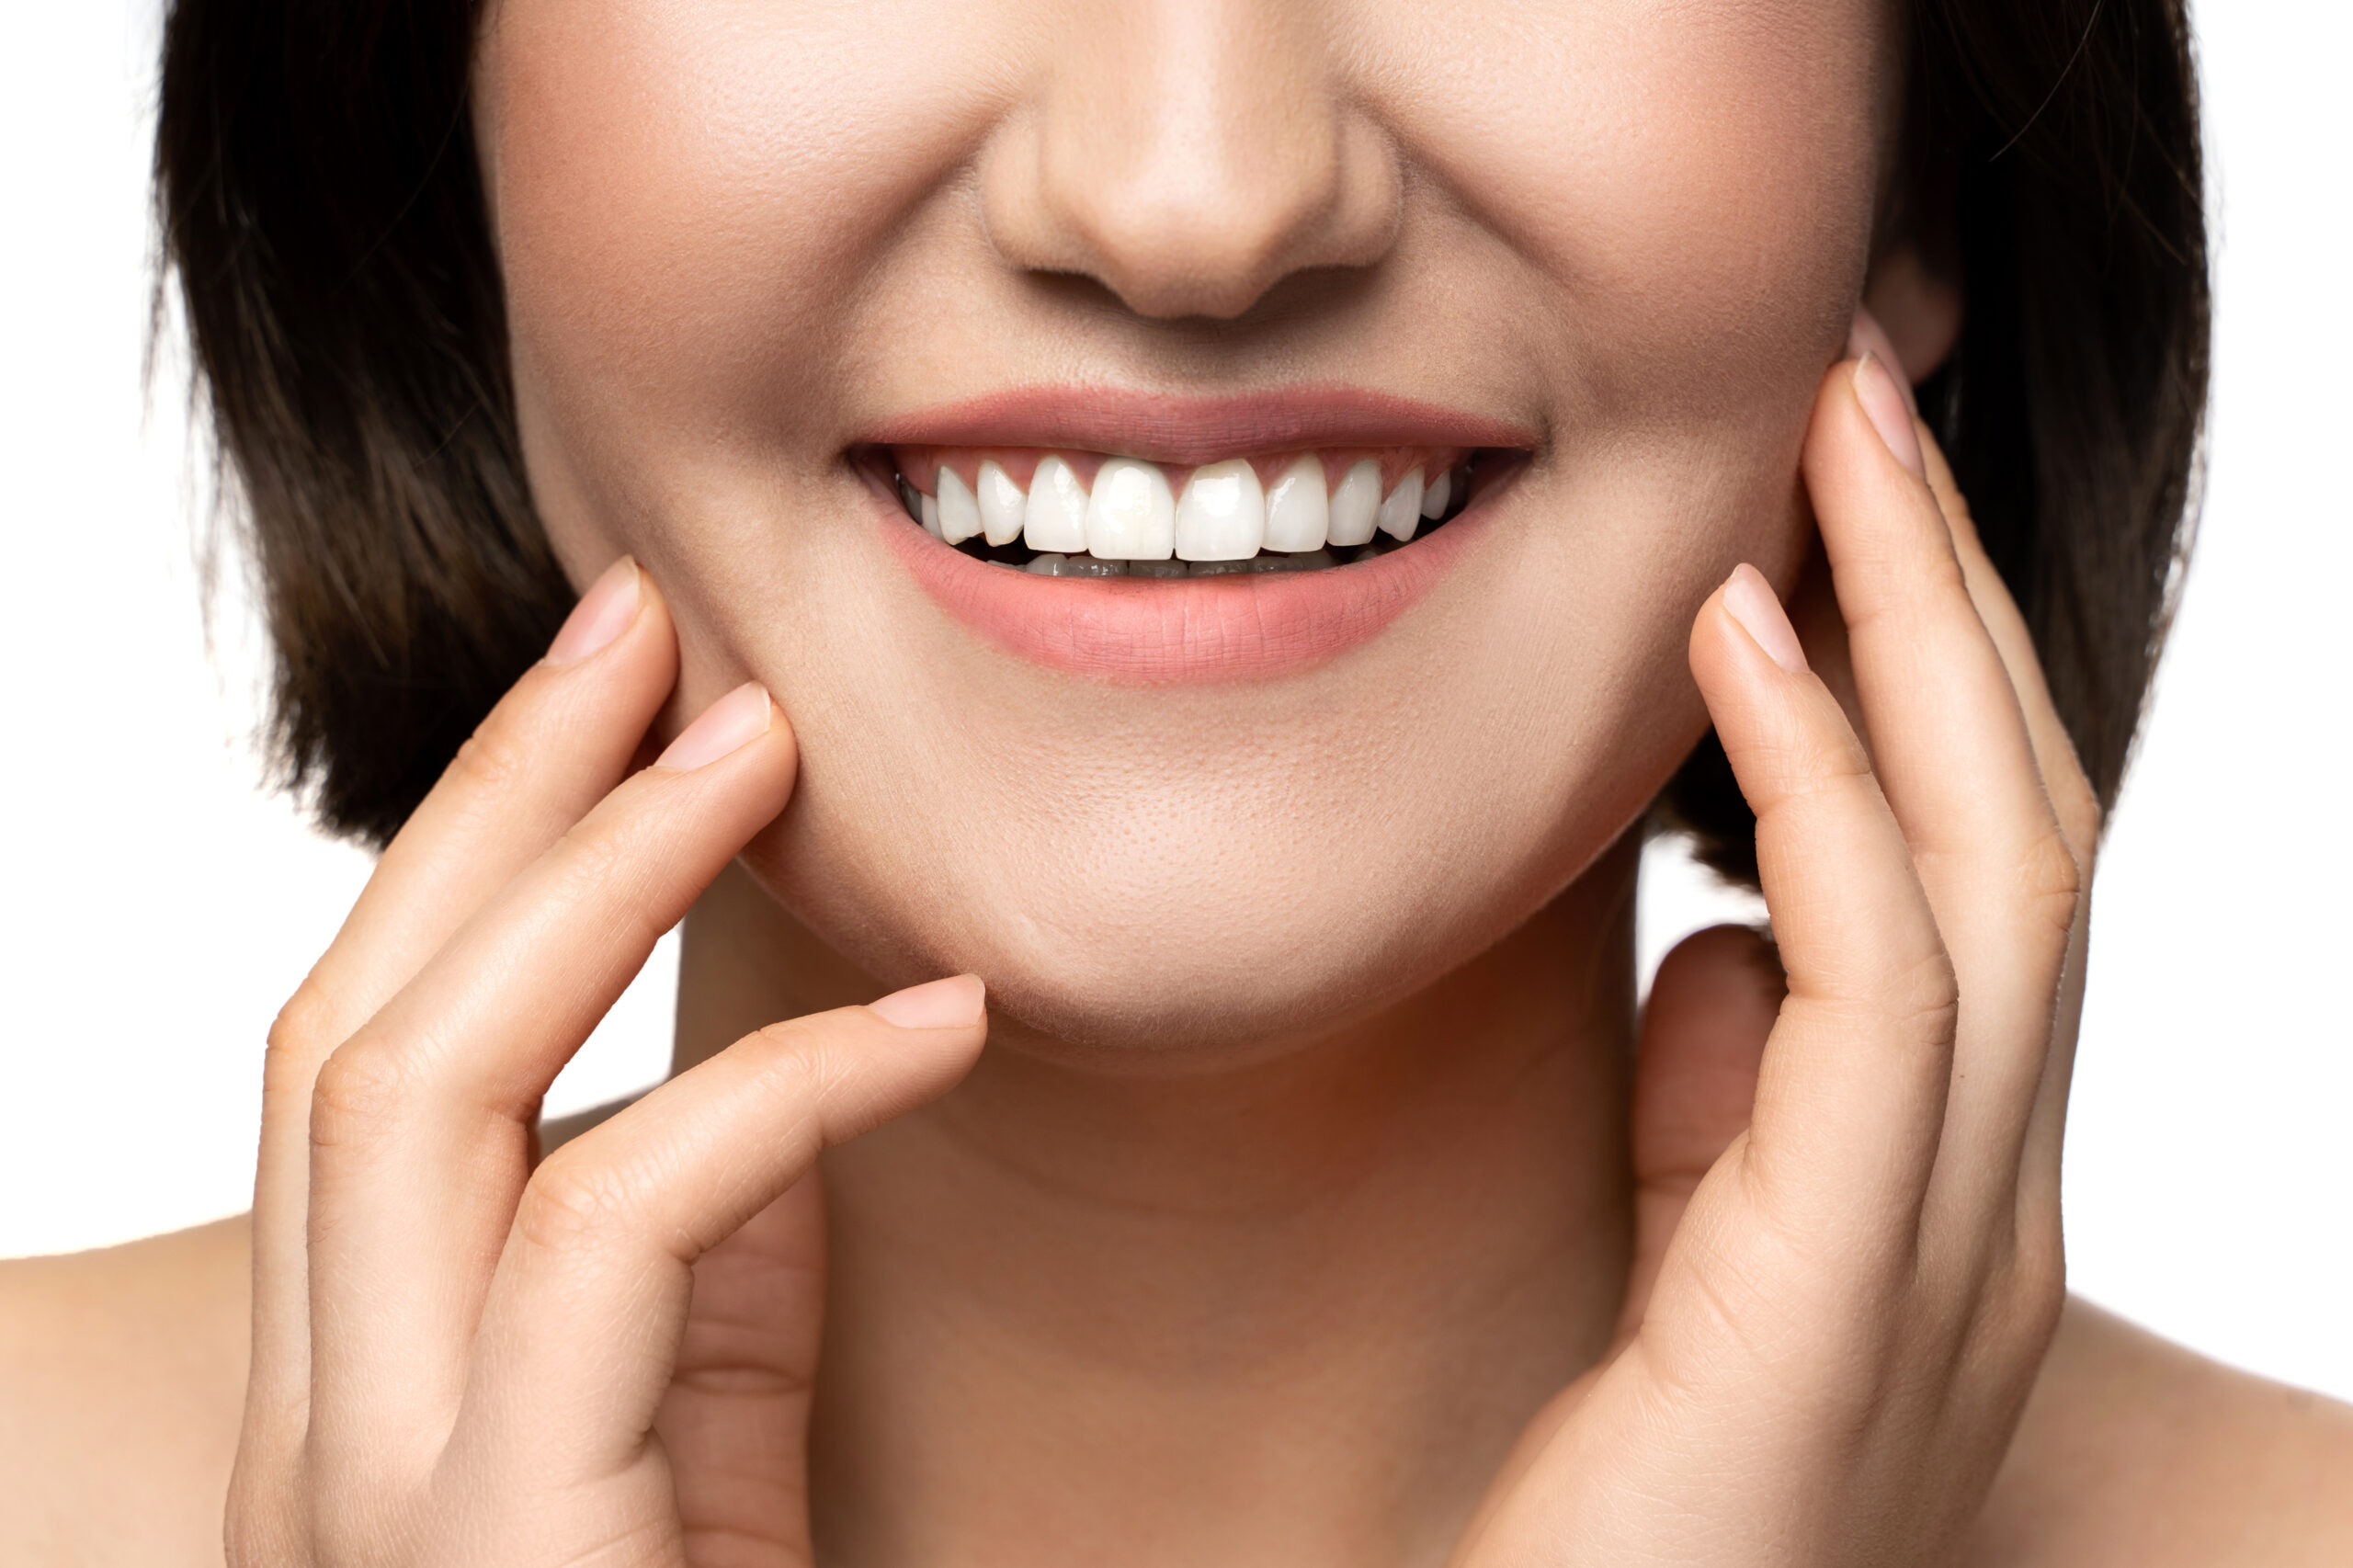 Porcelain Veneers – Are They Worth the Investment?